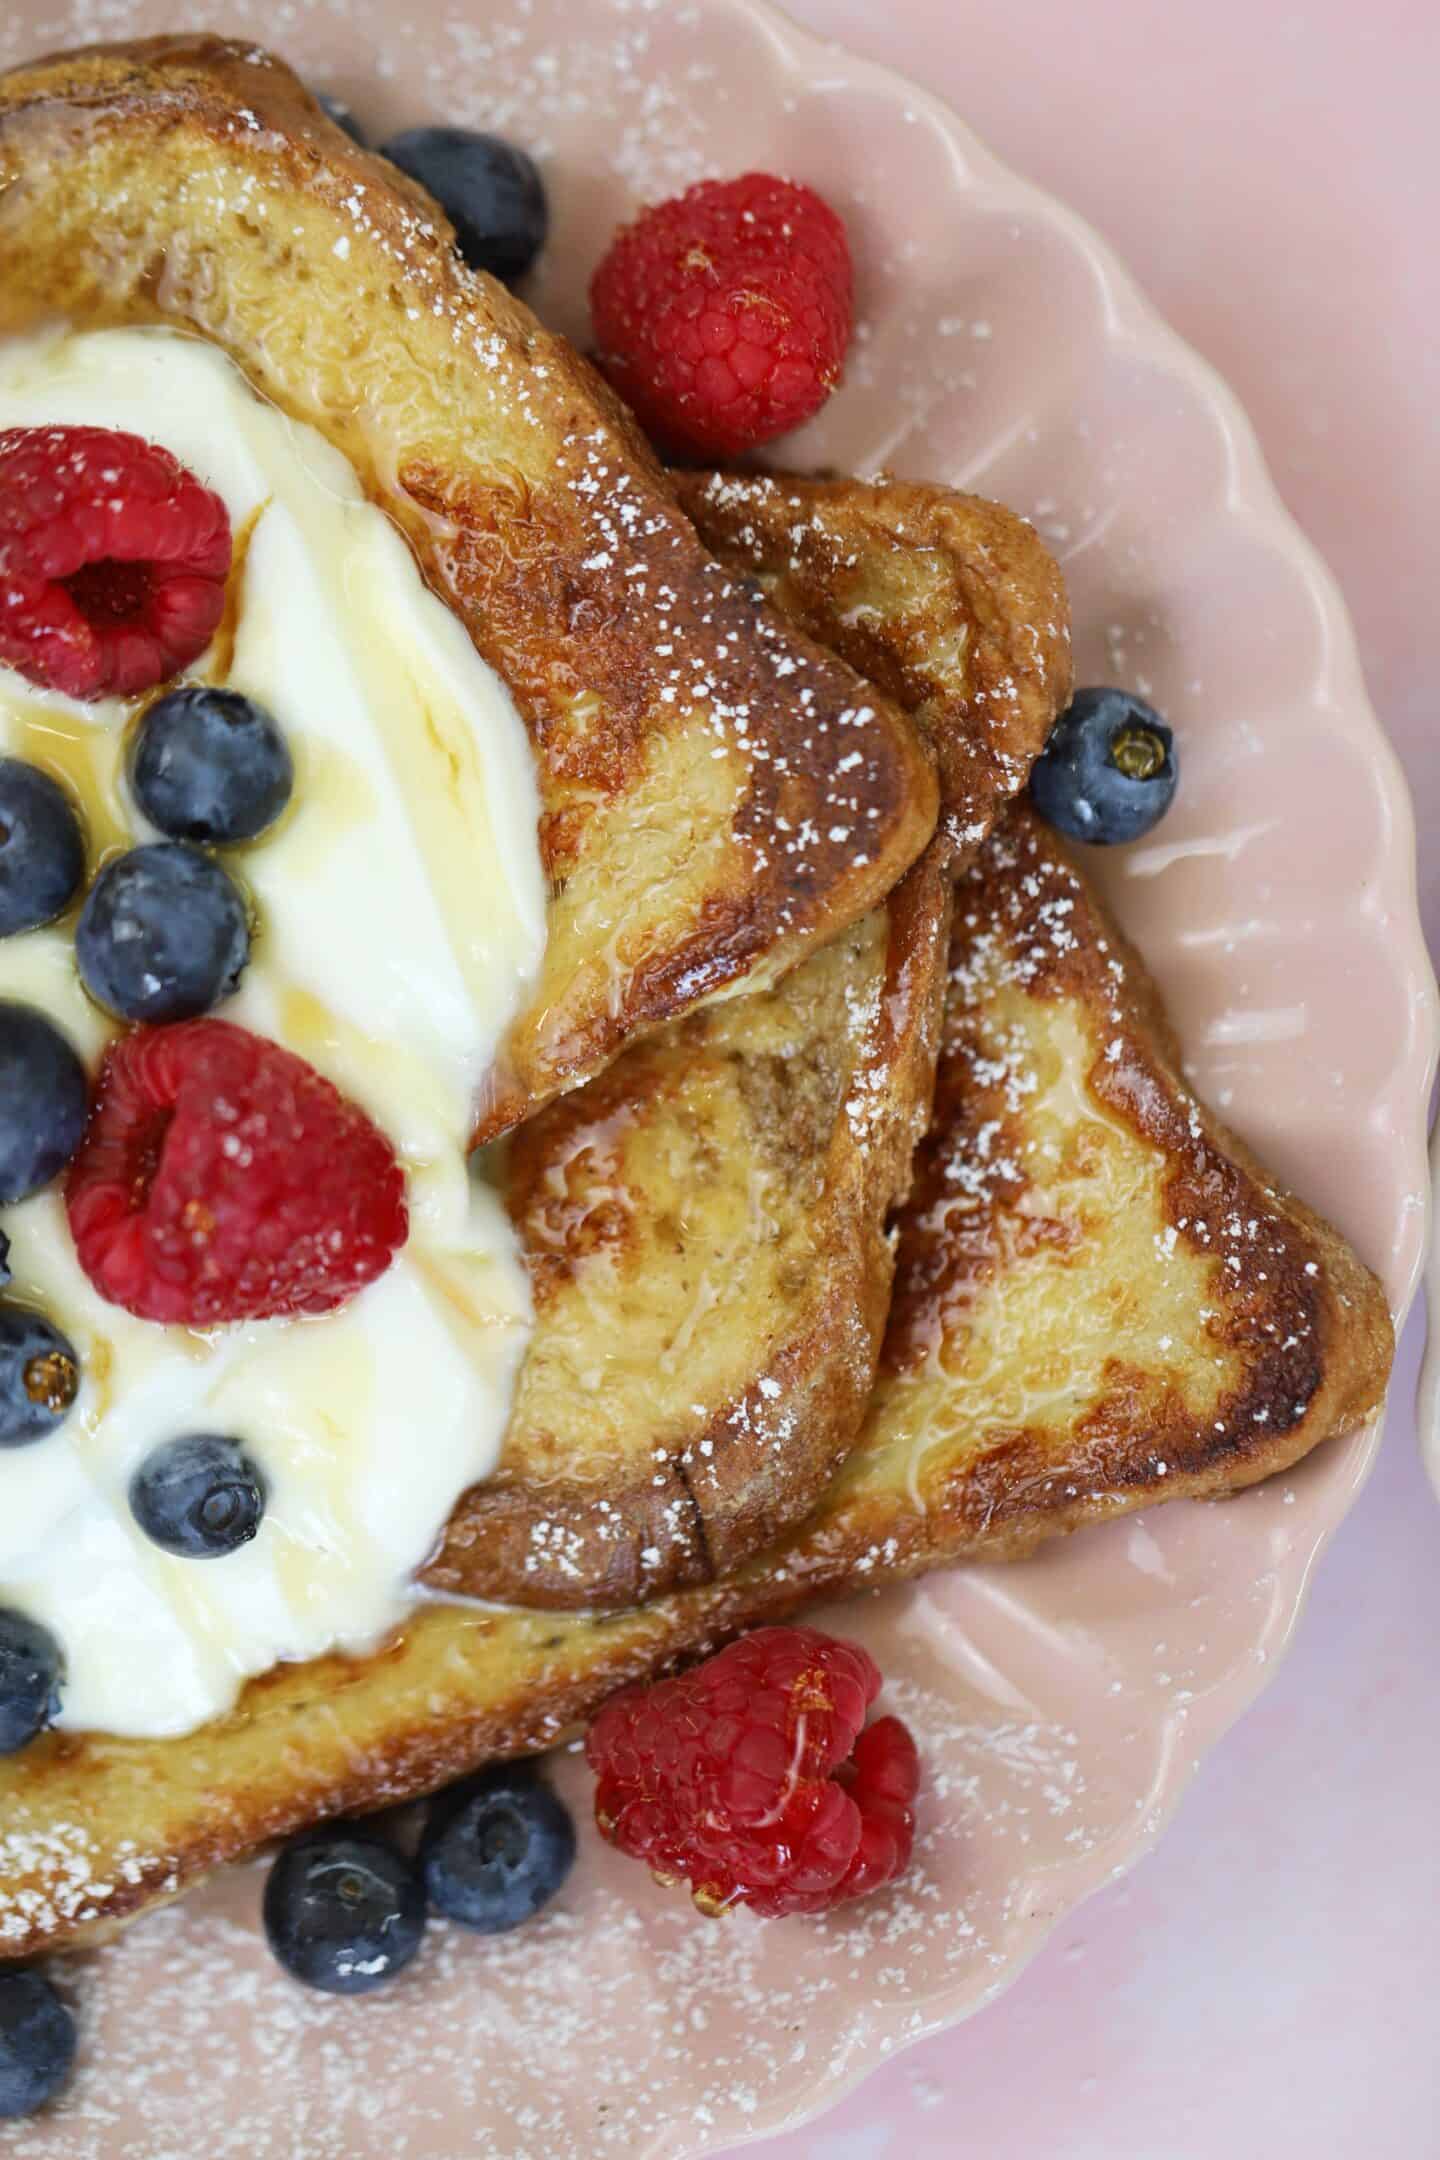 A plate of gluten free French toast with yoghurt and berries on top.